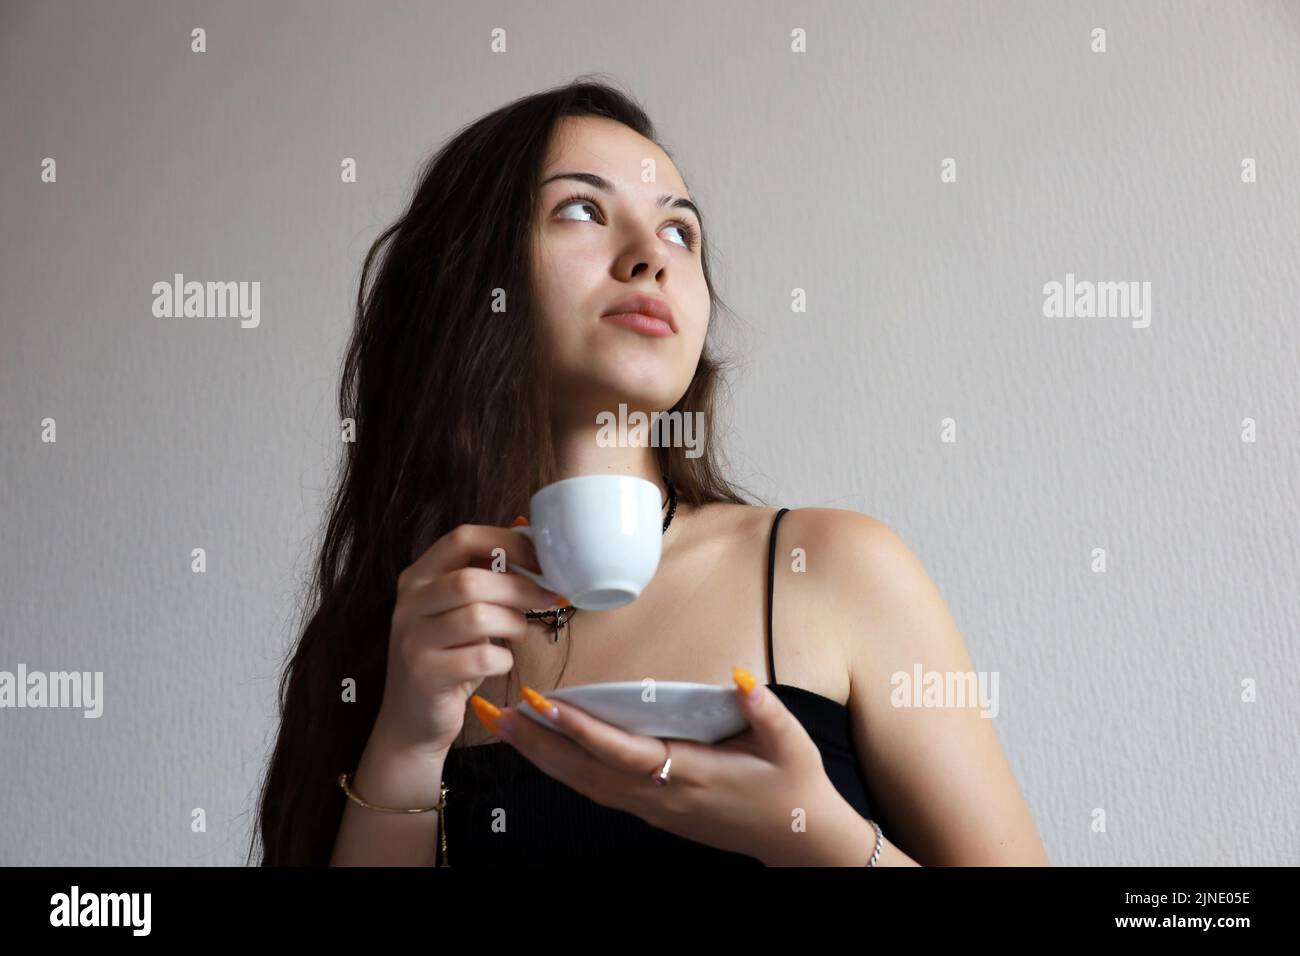 Sensual young girl with long hair drinking tea or coffee, white cup and saucer in female hands. Concept of inspiration, relaxing at home, cozy morning Stock Photo